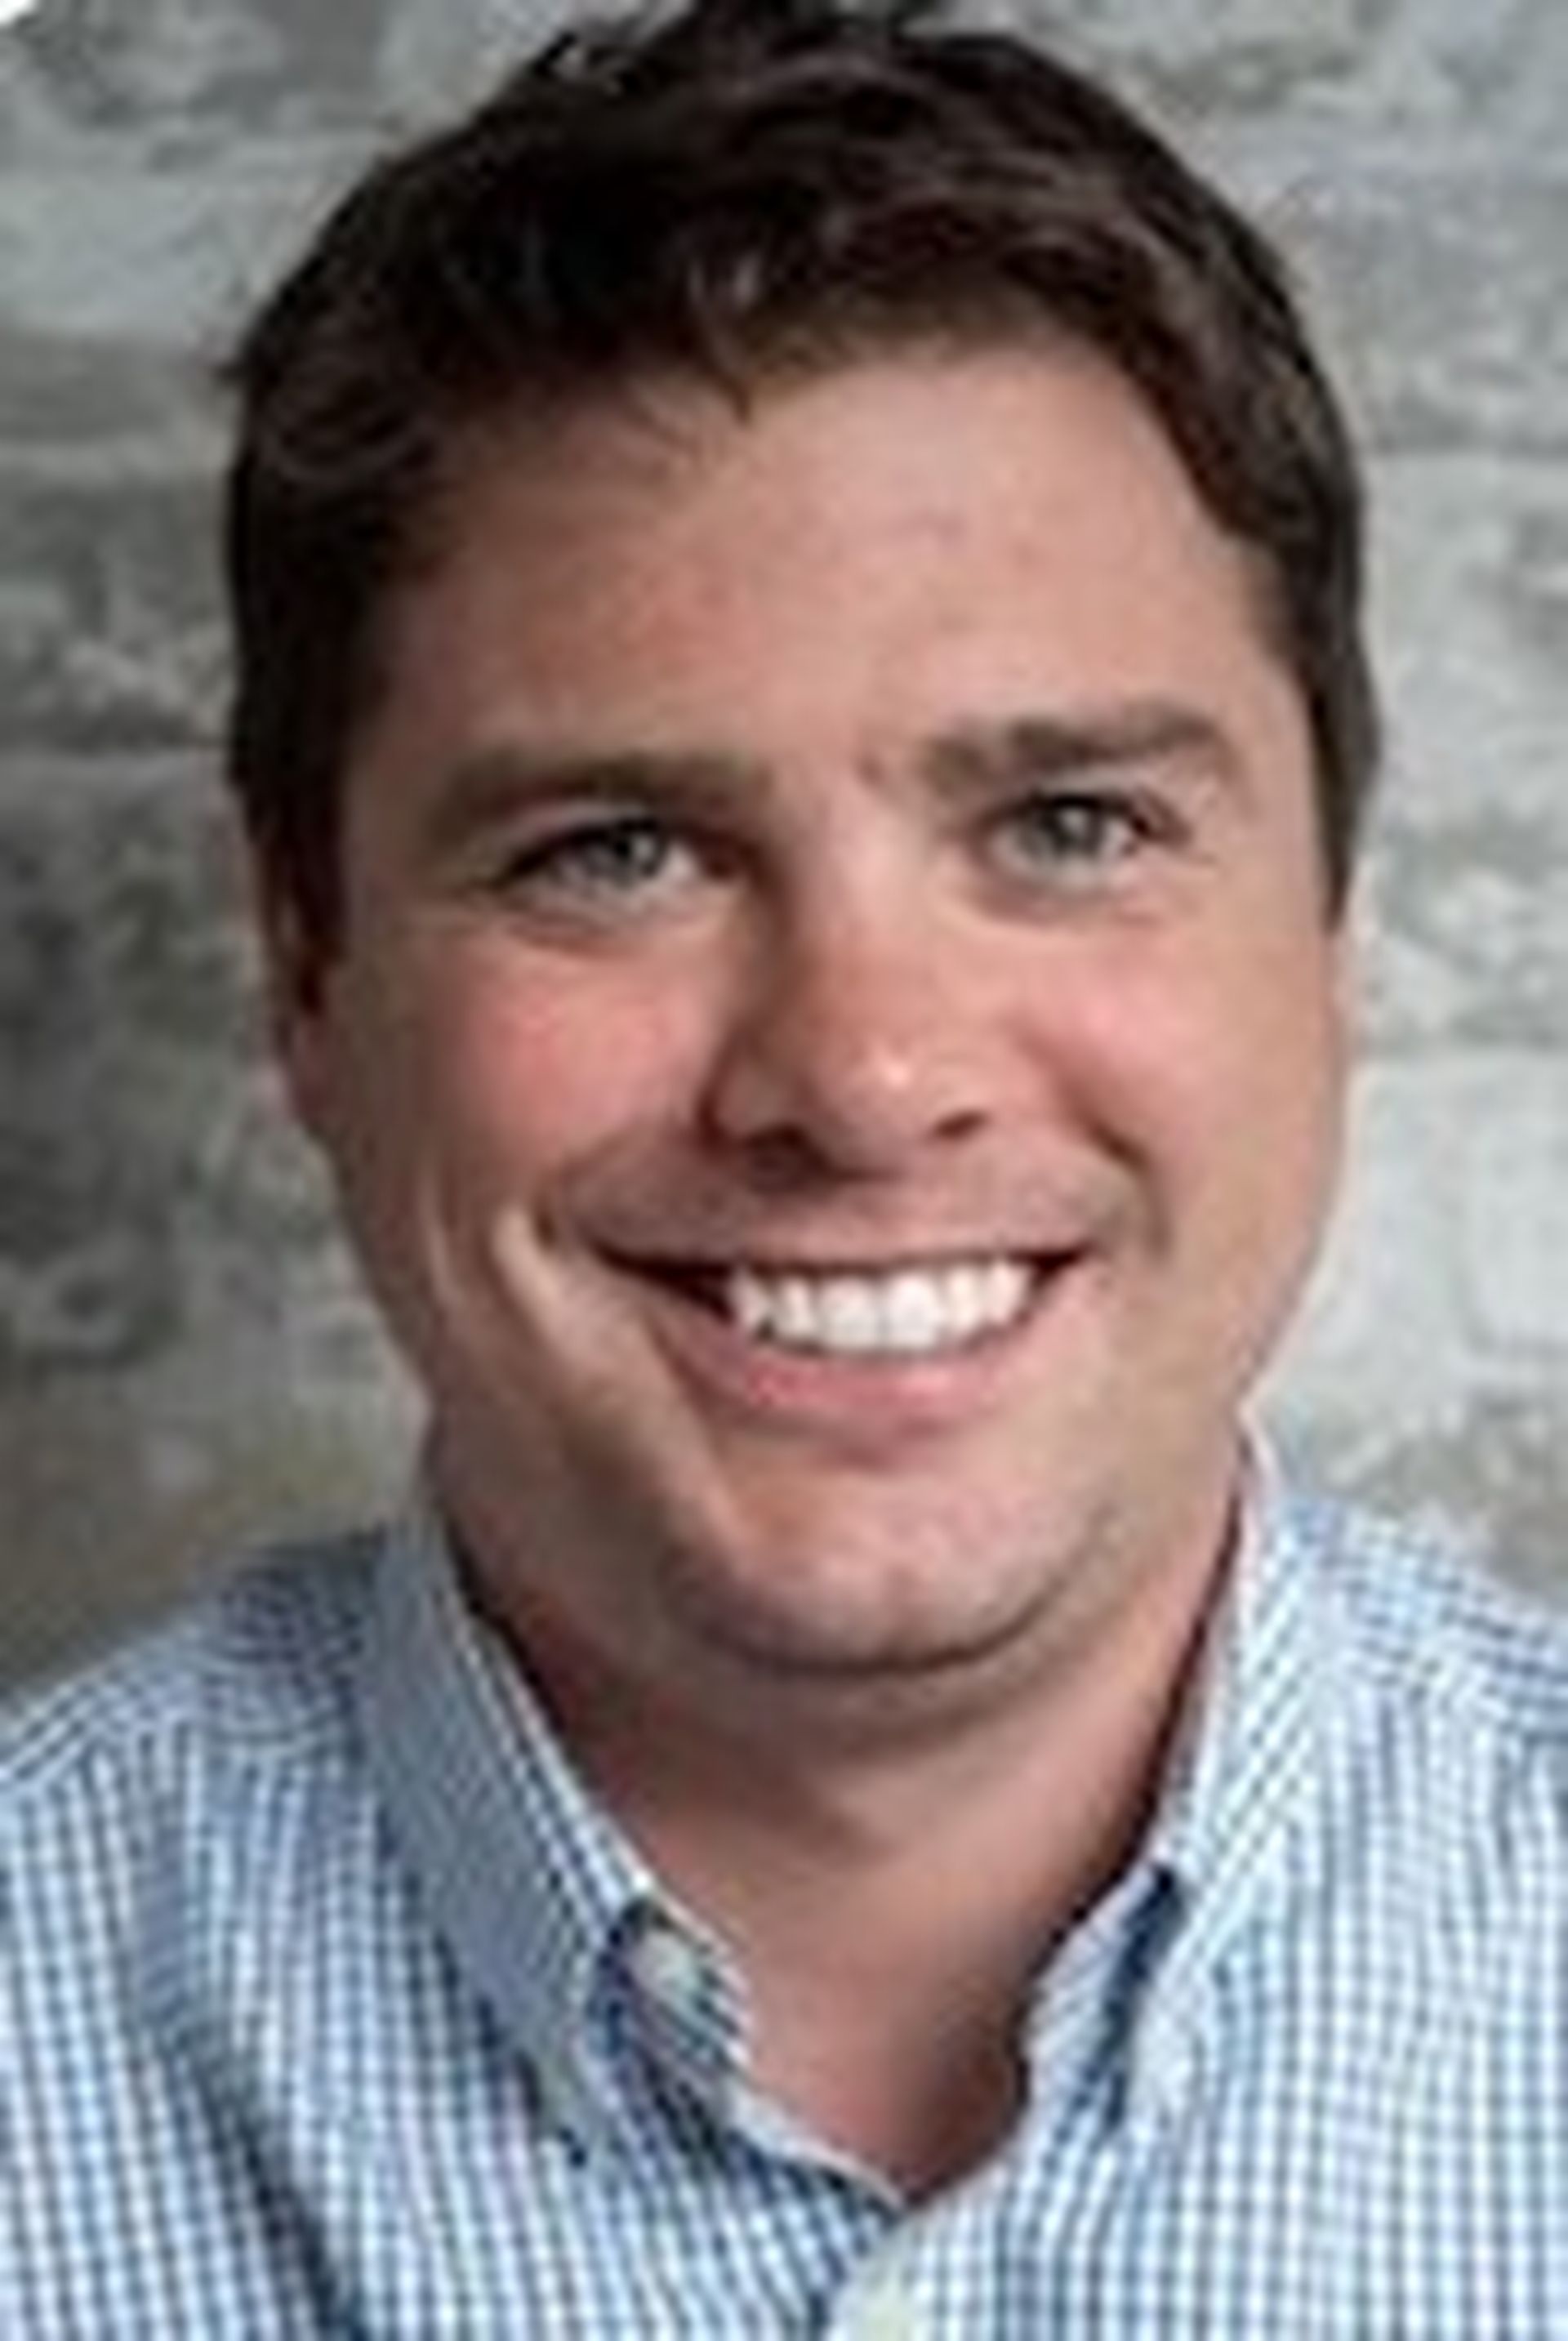 Author: Kyle Fiehler, manager, brand content writing at OpenText, parent of Webroot